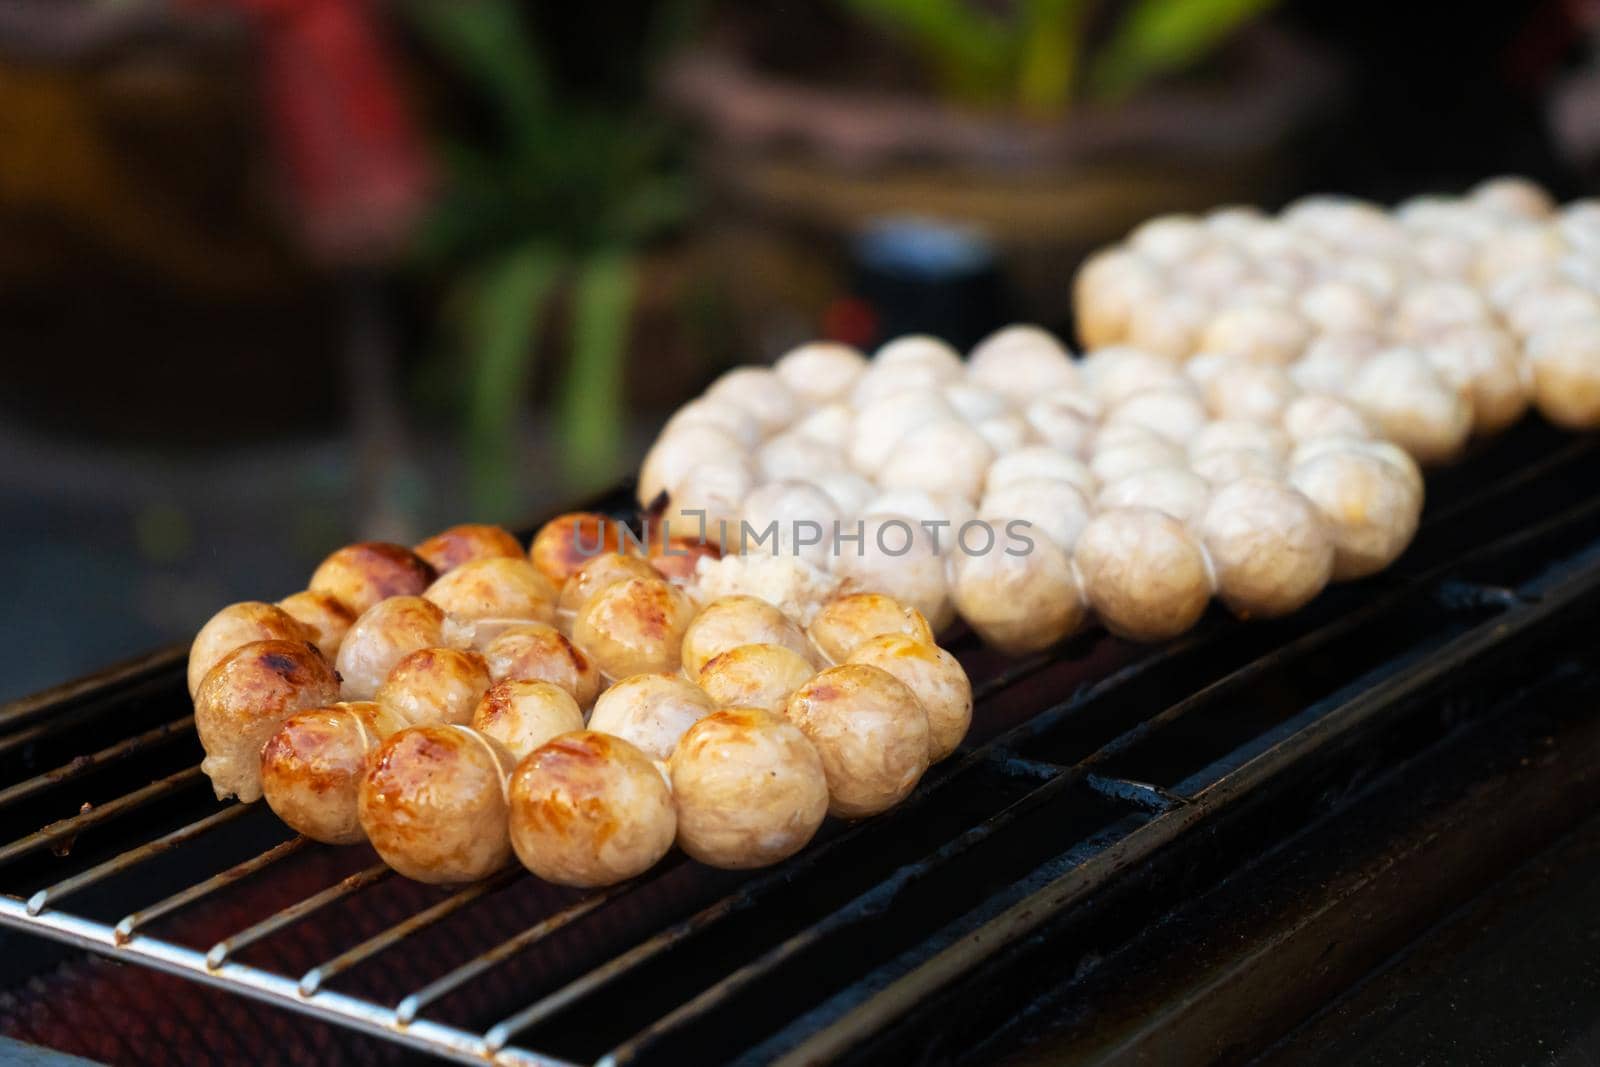 Meatballs are fried on an open-air stove at a street food market in Asia.